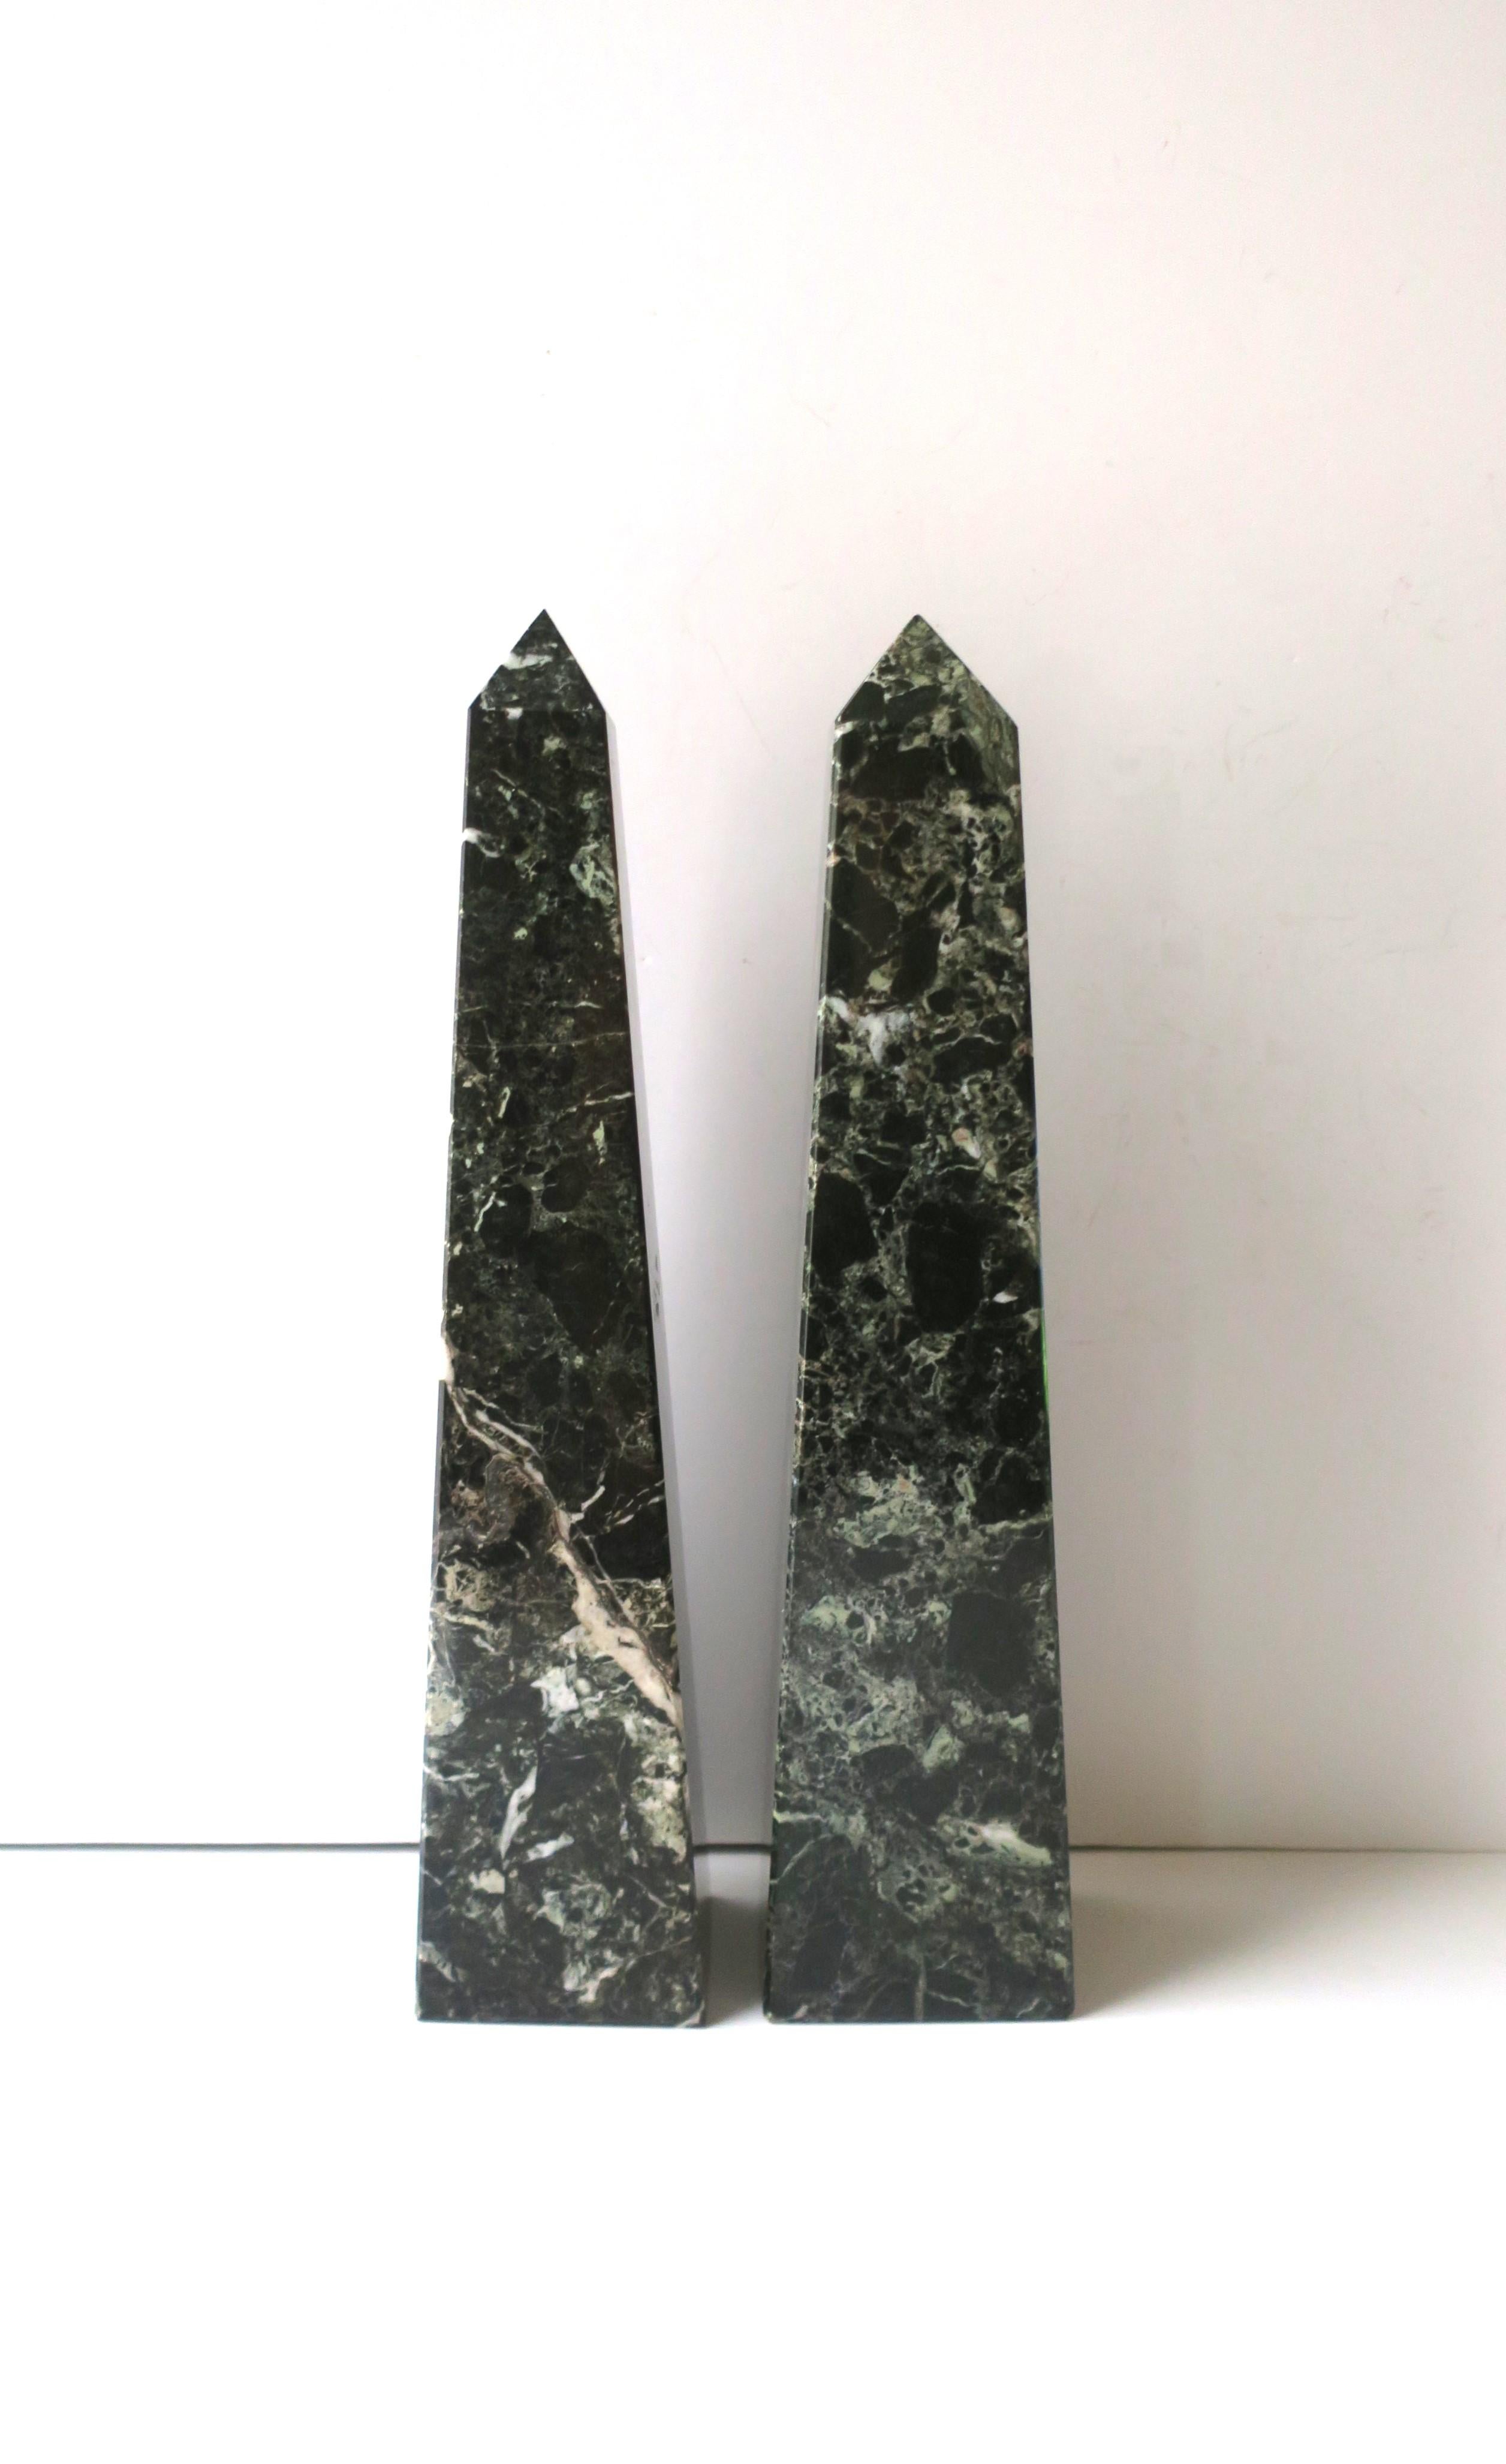 A substantial pair of marble Obelisks, in the Modern style, circa mid-20th century. Pair are a very dark green, forest green, with white and light-green veining. Very good condition as shown in images. No chips noted. Dimensions: 3.19